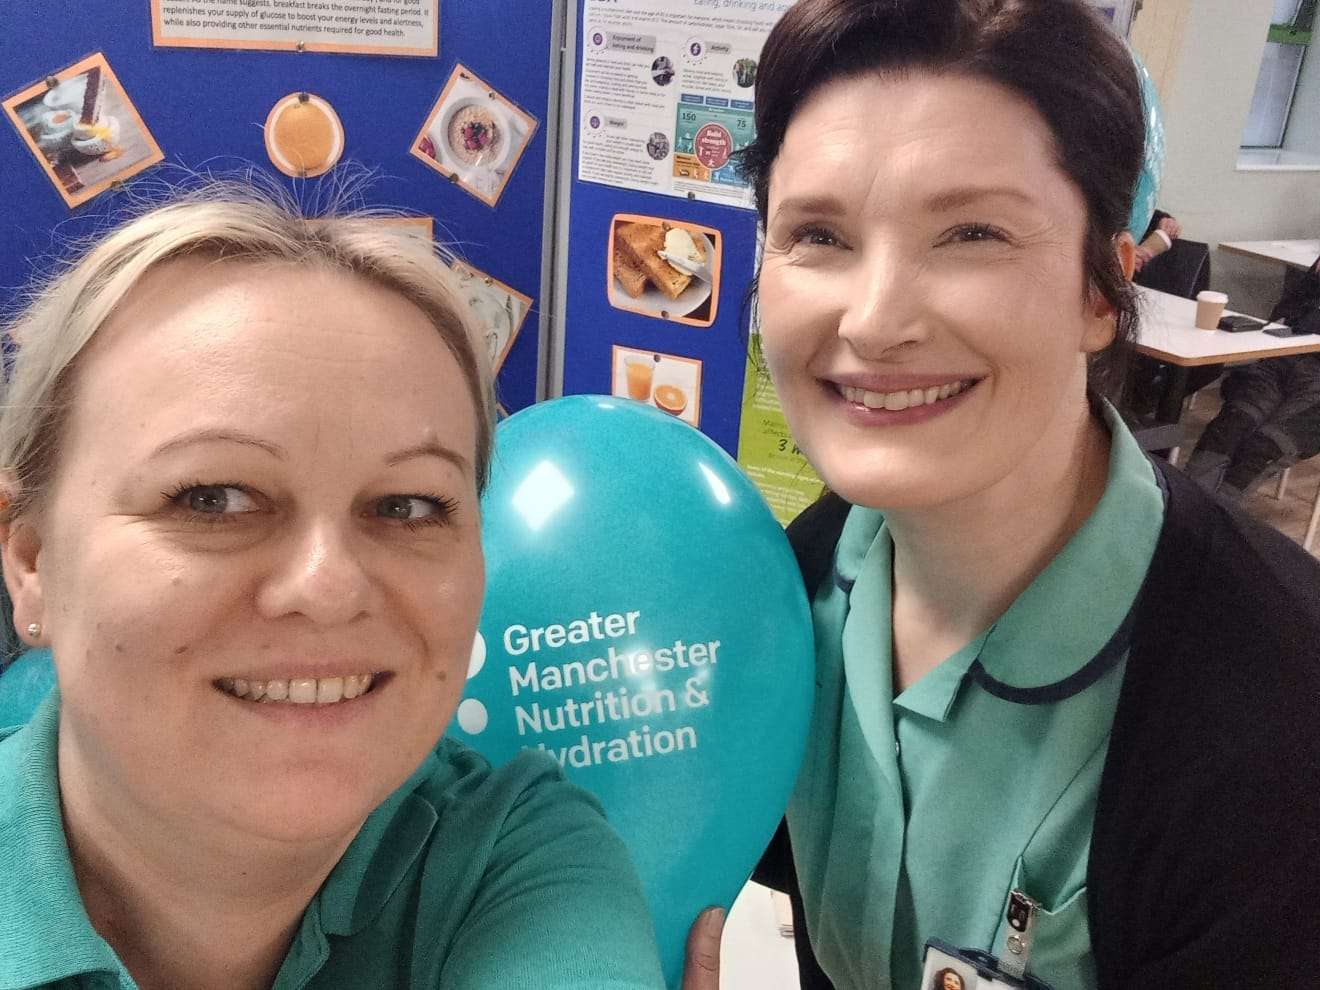 Selfie at information stand for Nutrition and Hydration Week at Royal Bolton Hospital